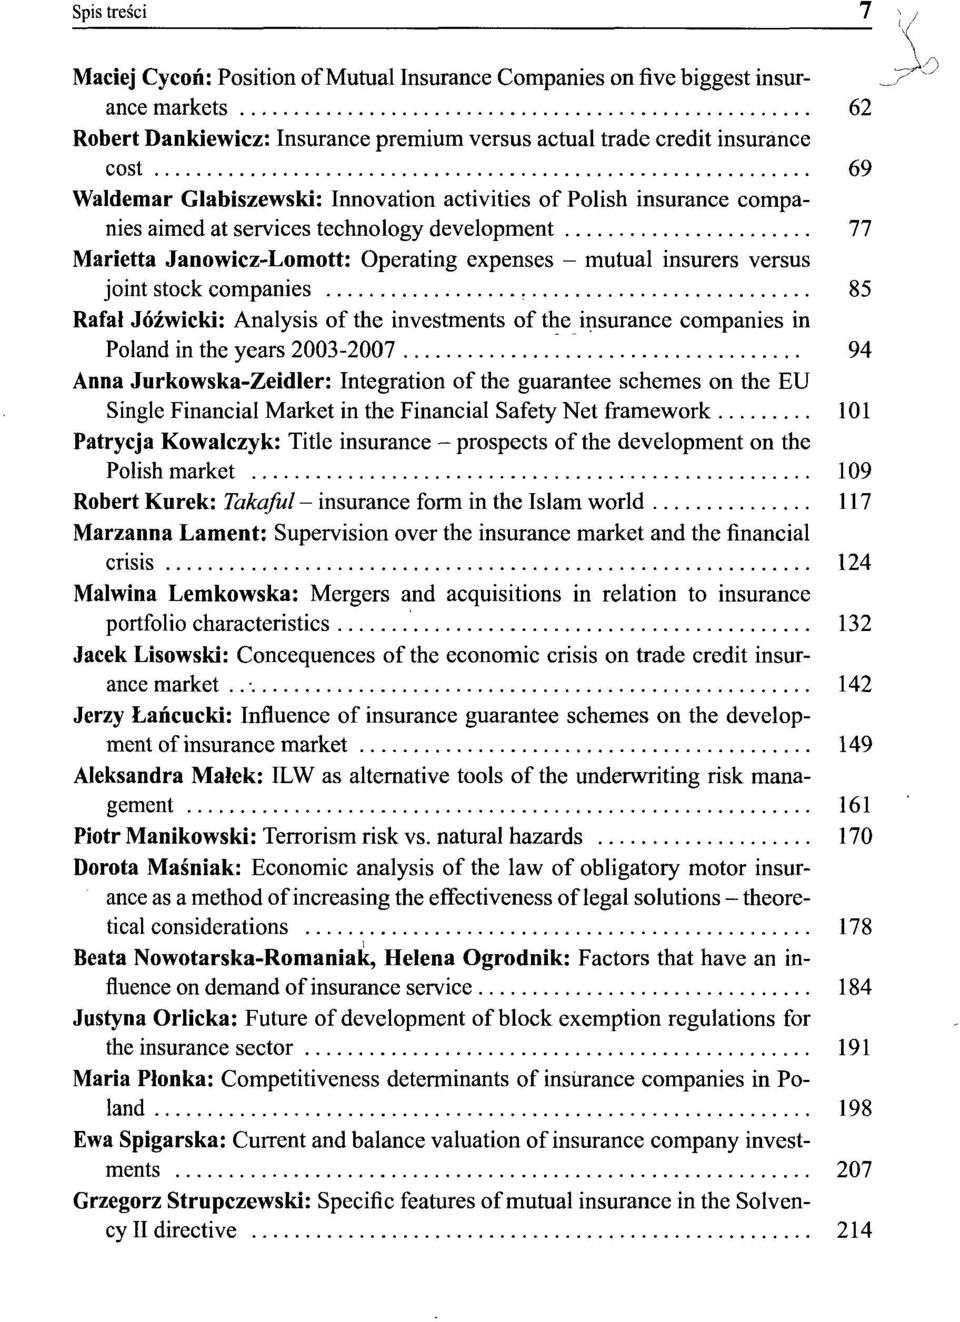 companies 85 Rafał Jóźwicki: Analysis of the uwestments of the insurance companies in Poland in the years 2003-2007 '.